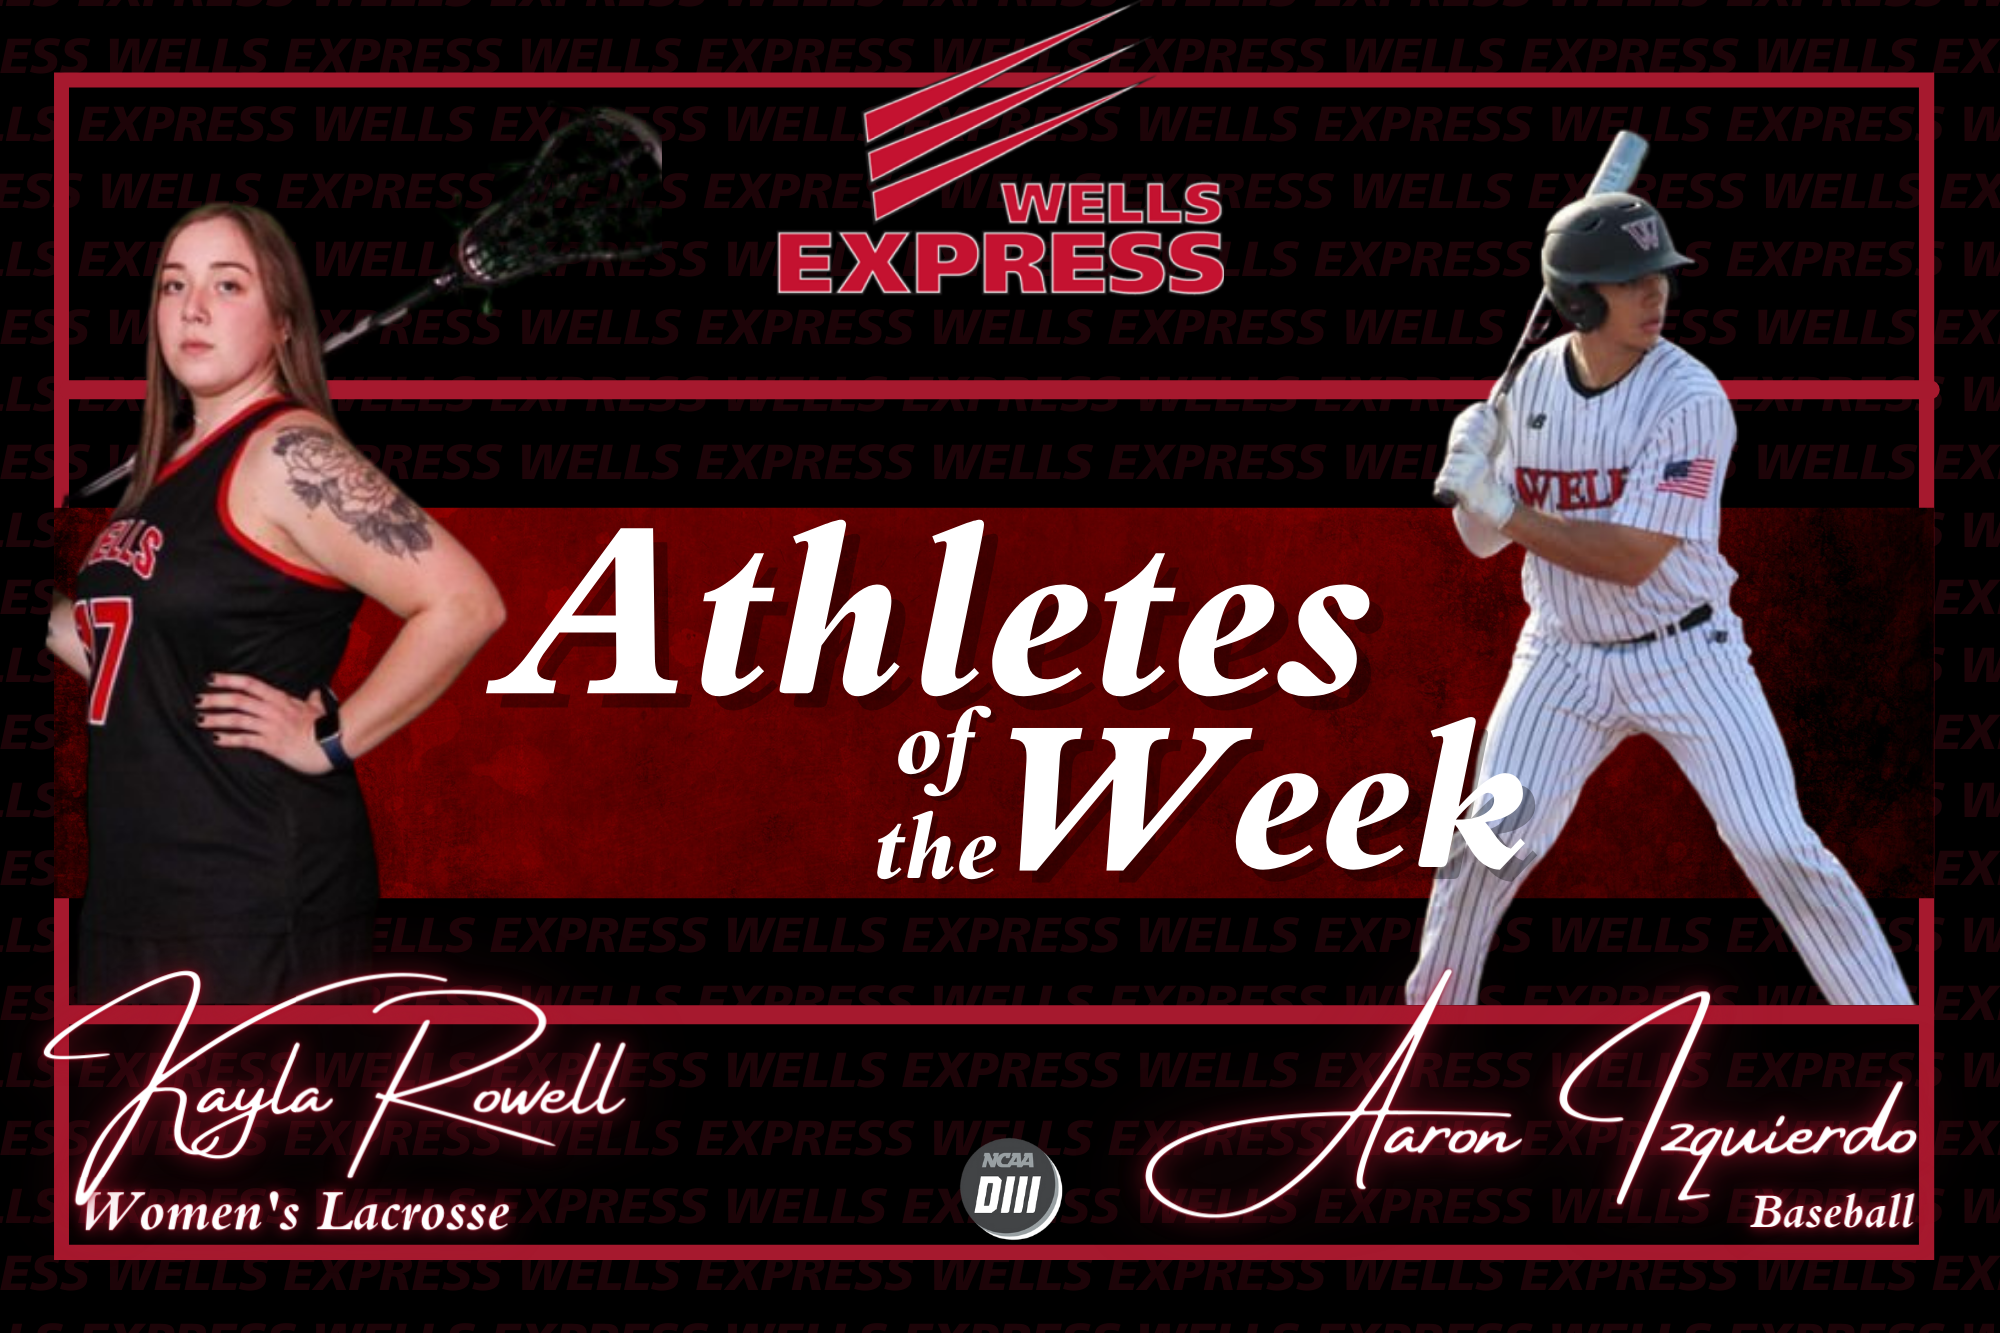 Wells Express Athletes of The Week 4/27